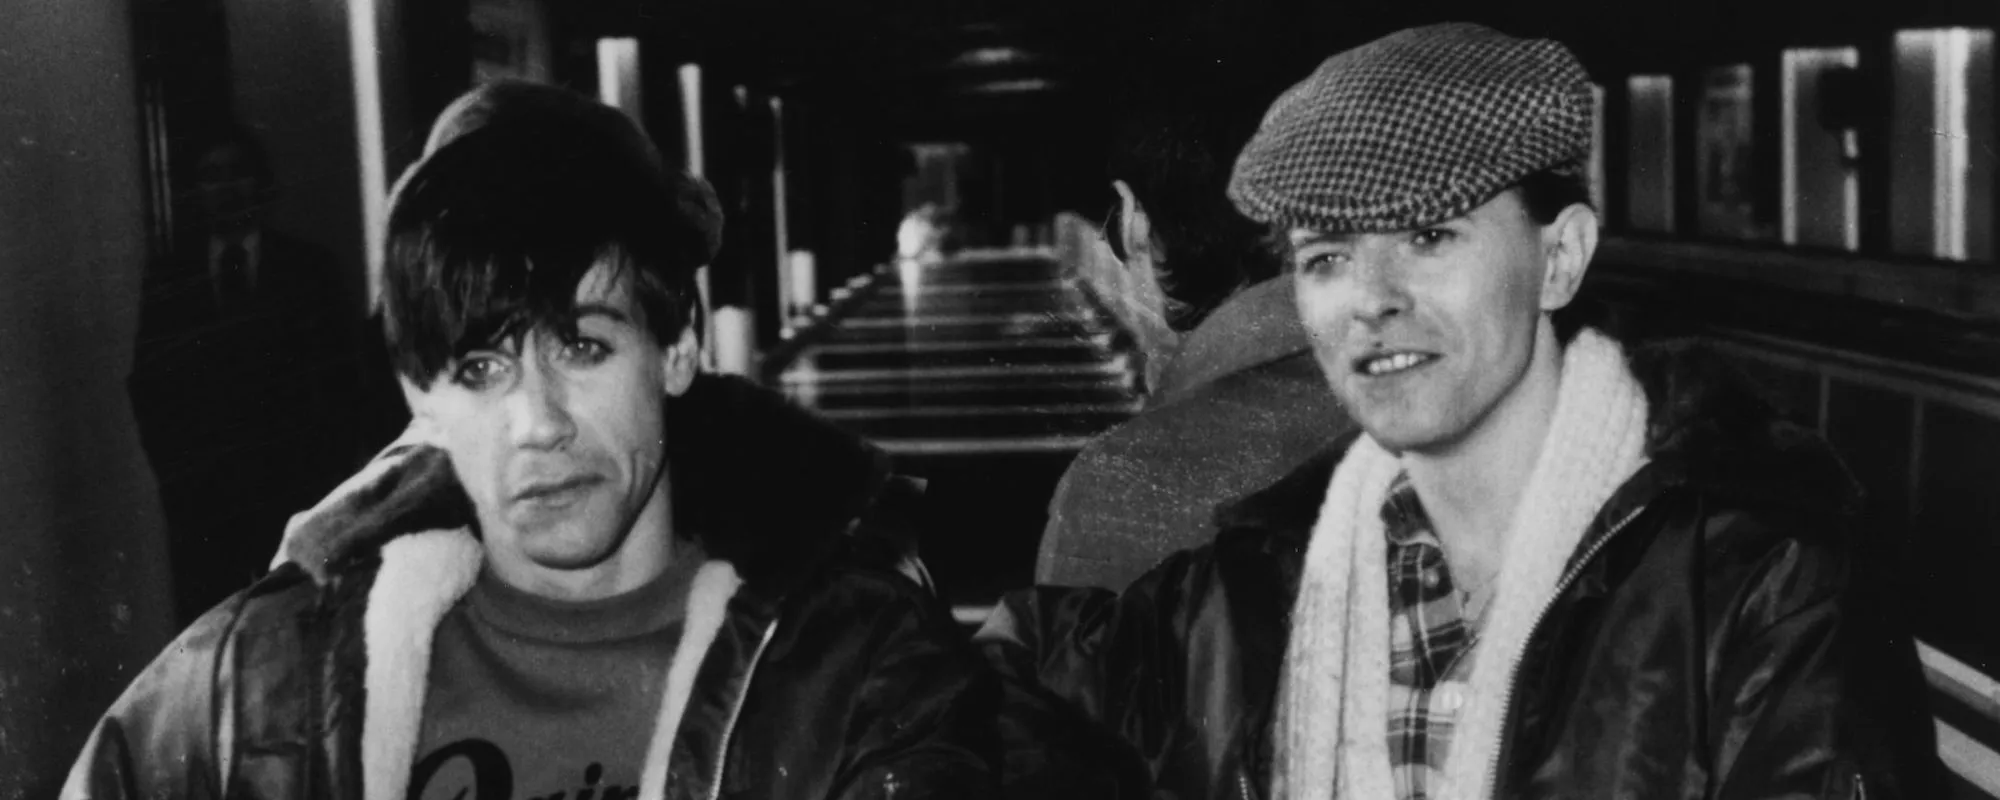 4 Songs David Bowie and Iggy Pop Co-Wrote After ‘The Idiot’